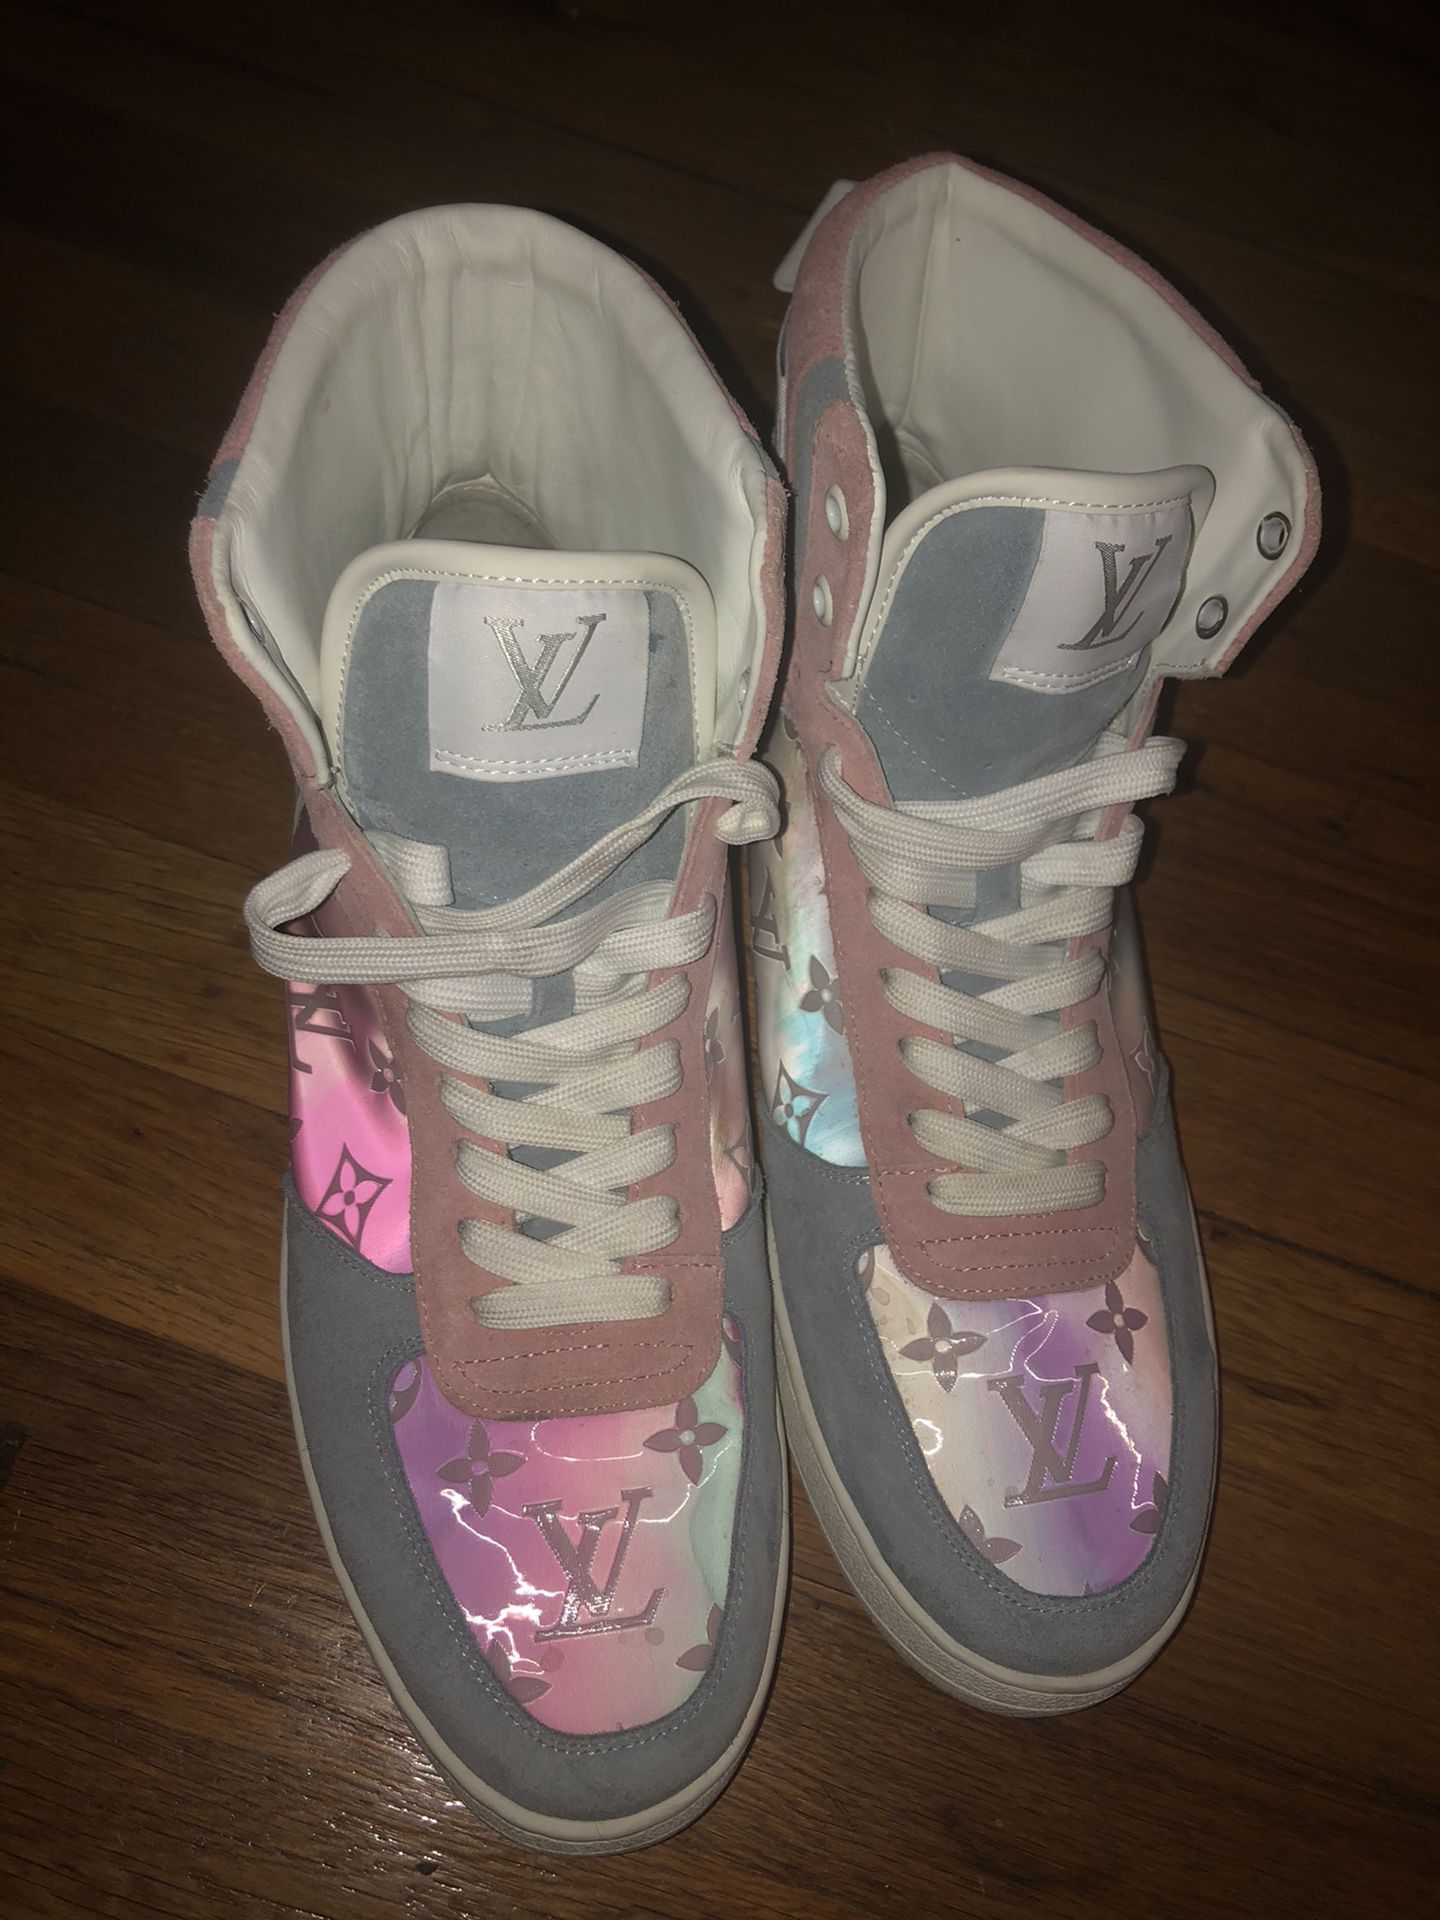 Louis Vuitton Men's Hologram Size 10 for Sale in Freeport, NY - OfferUp